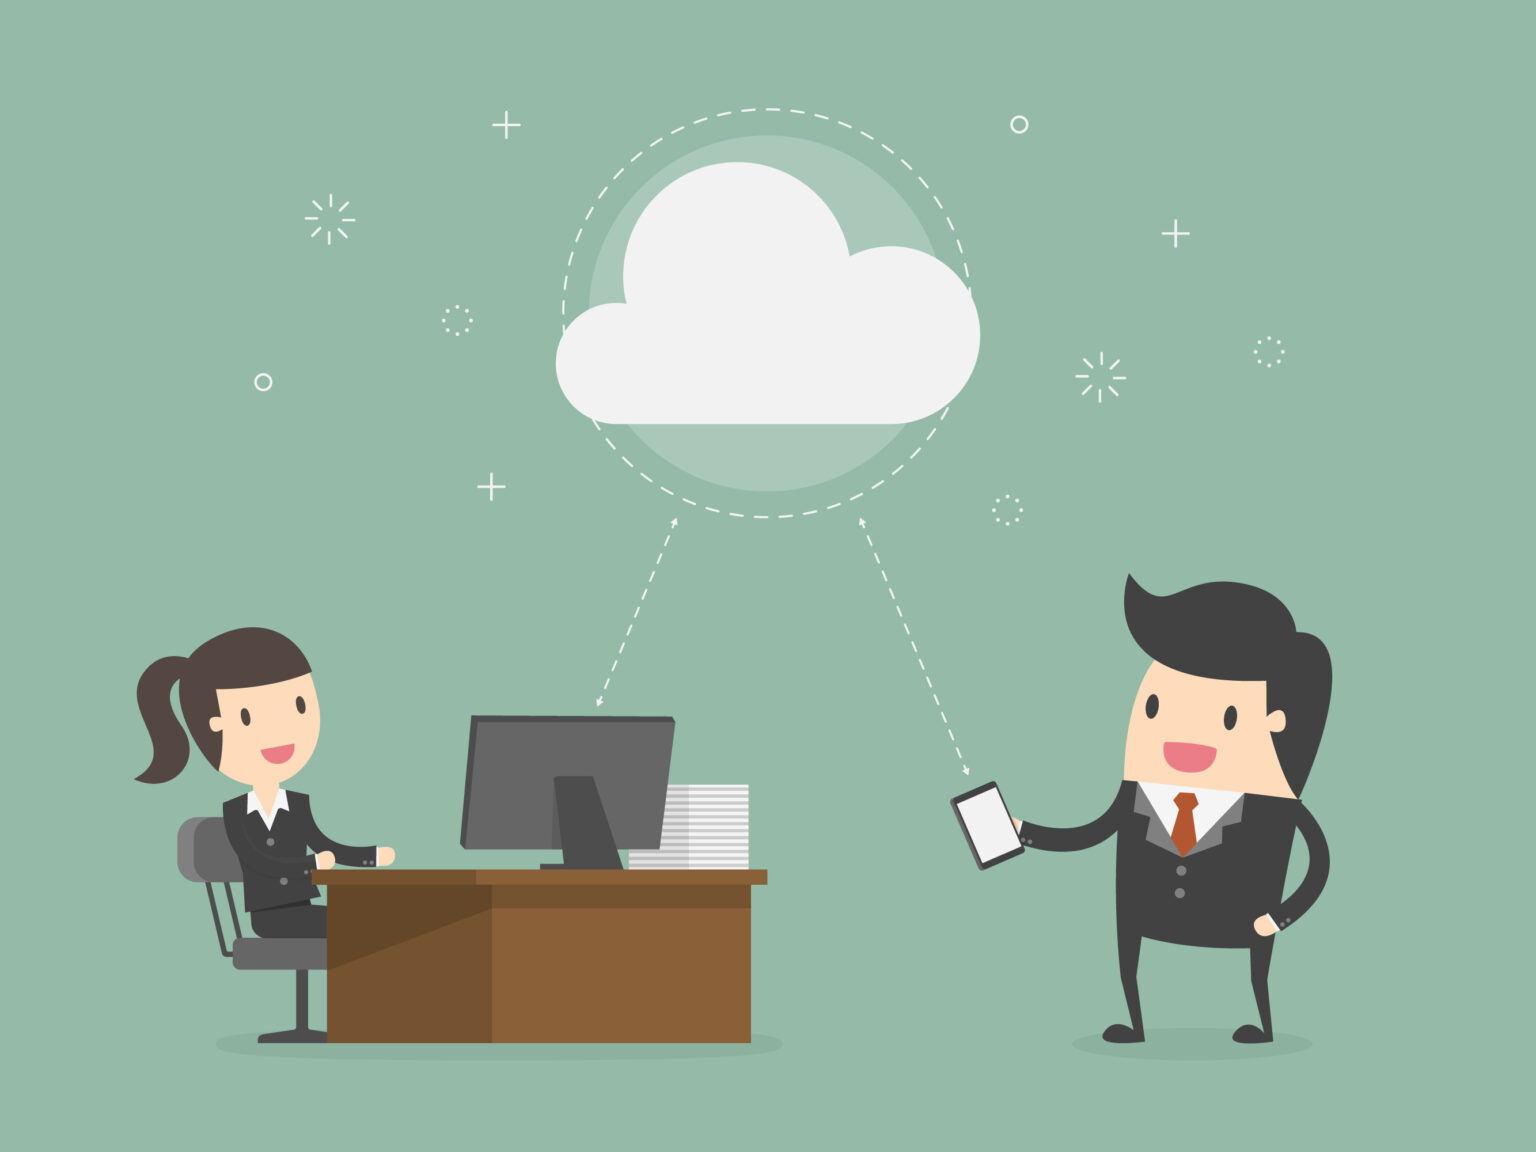 Cloud Computing Services For Small Businesses